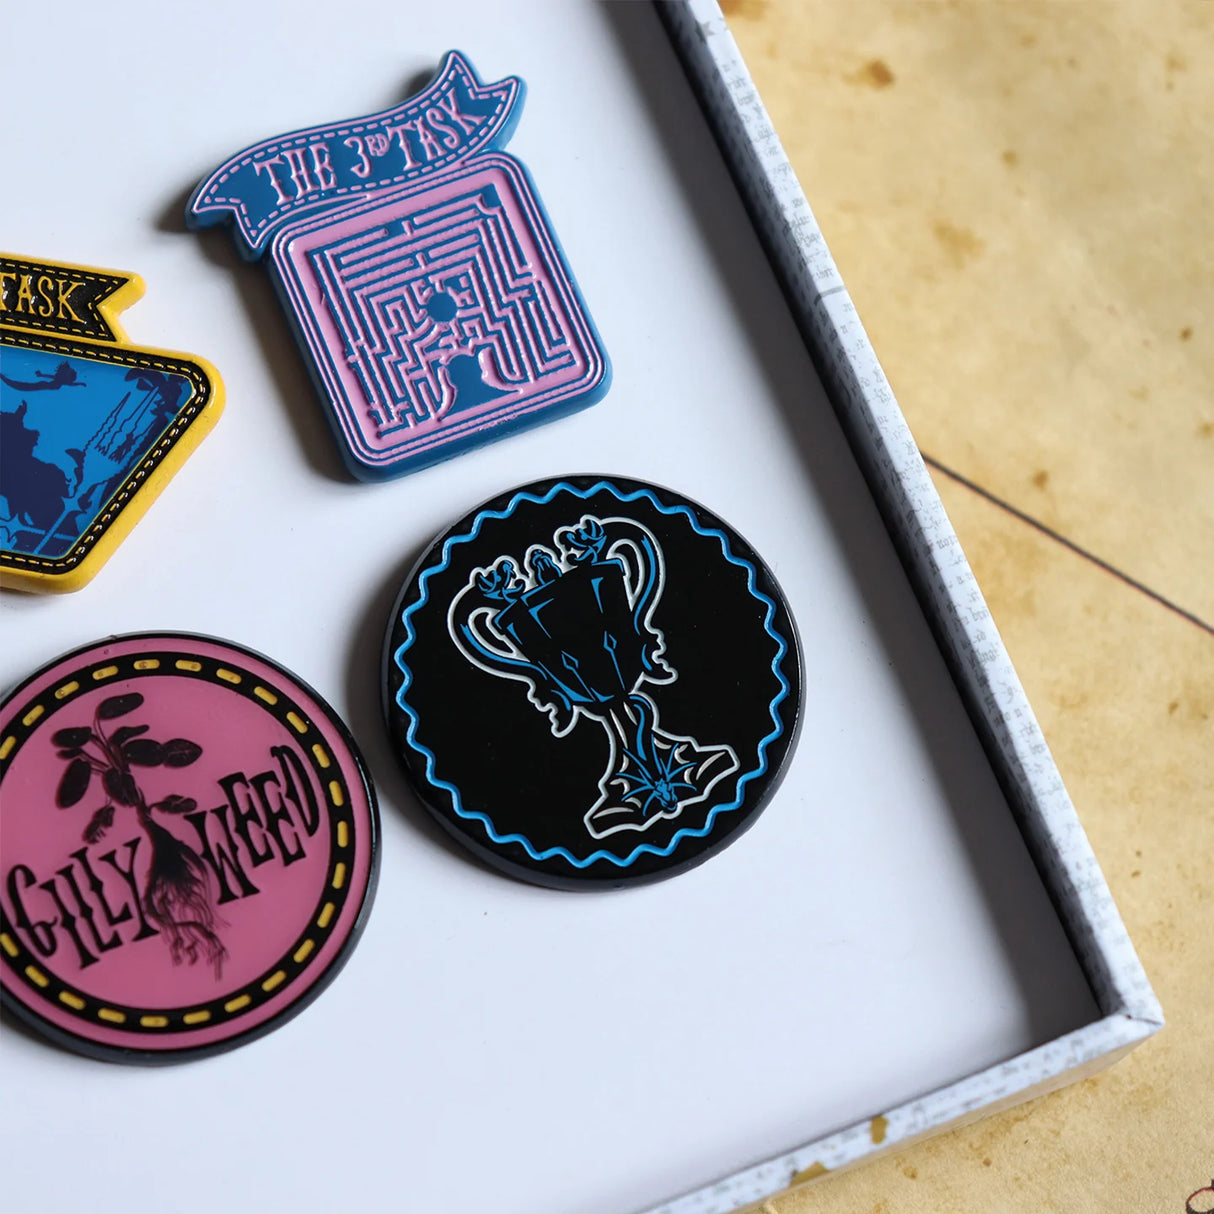 Harry Potter Triwizard Tournament | Set of 6 Pin Badges | Limited Edition